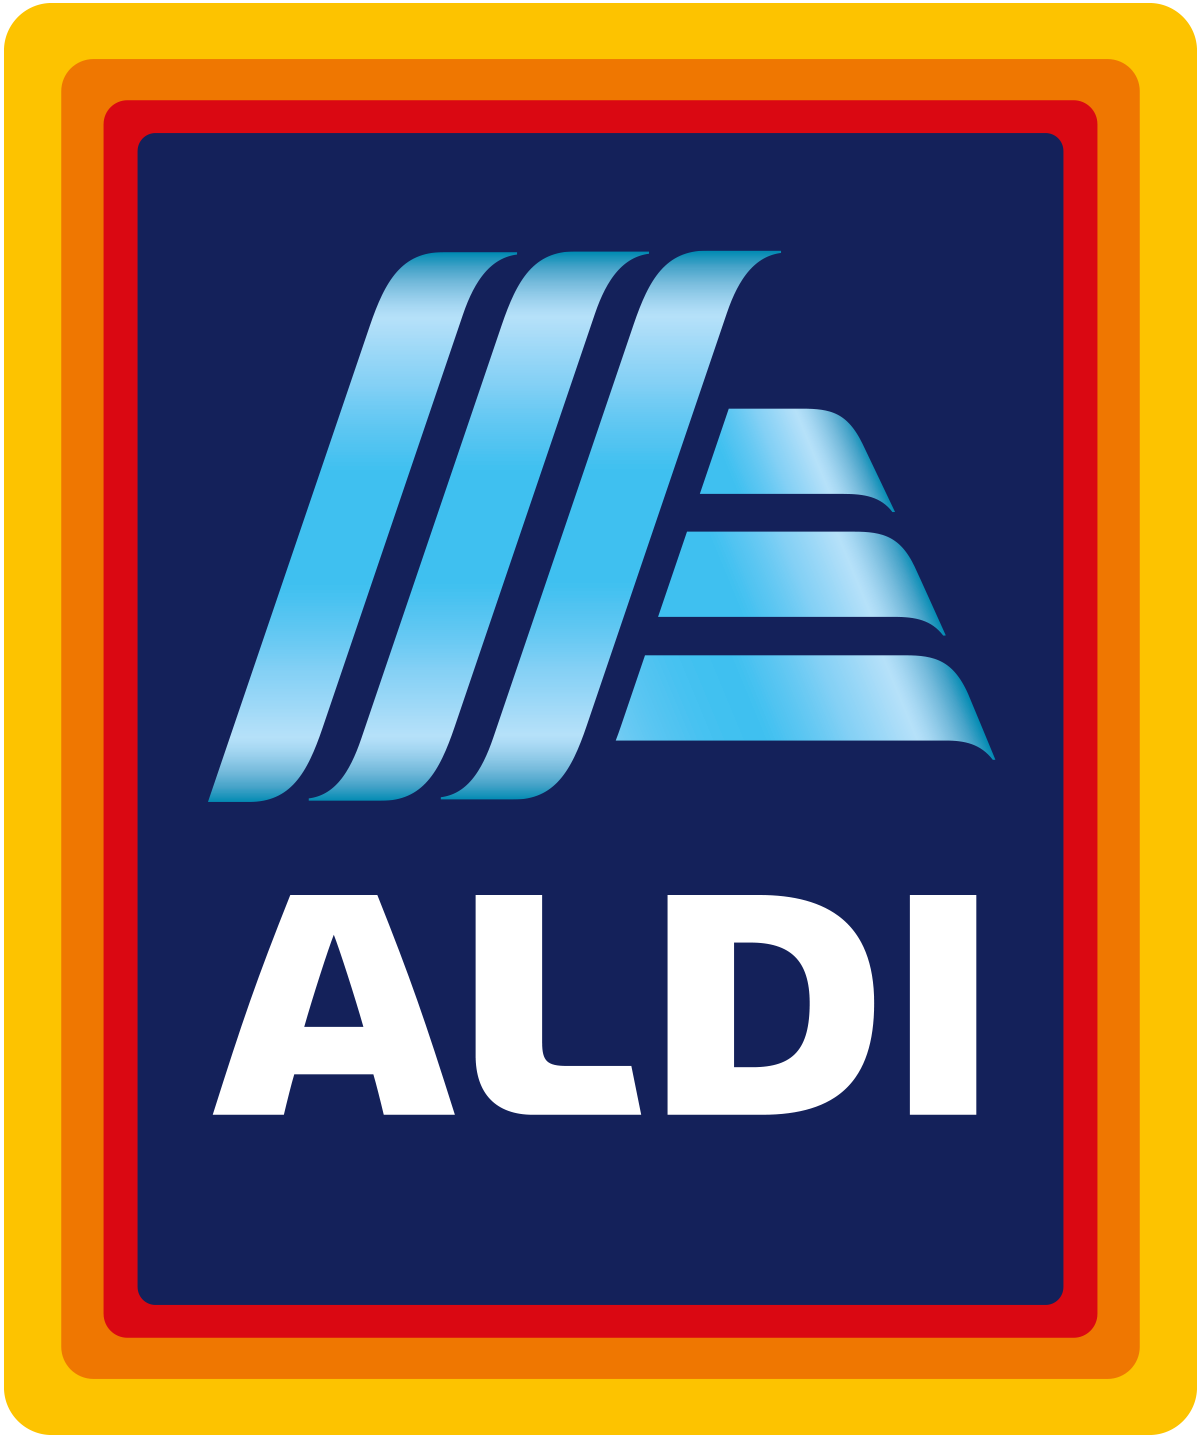 is aldi supermarket halal in the United States?